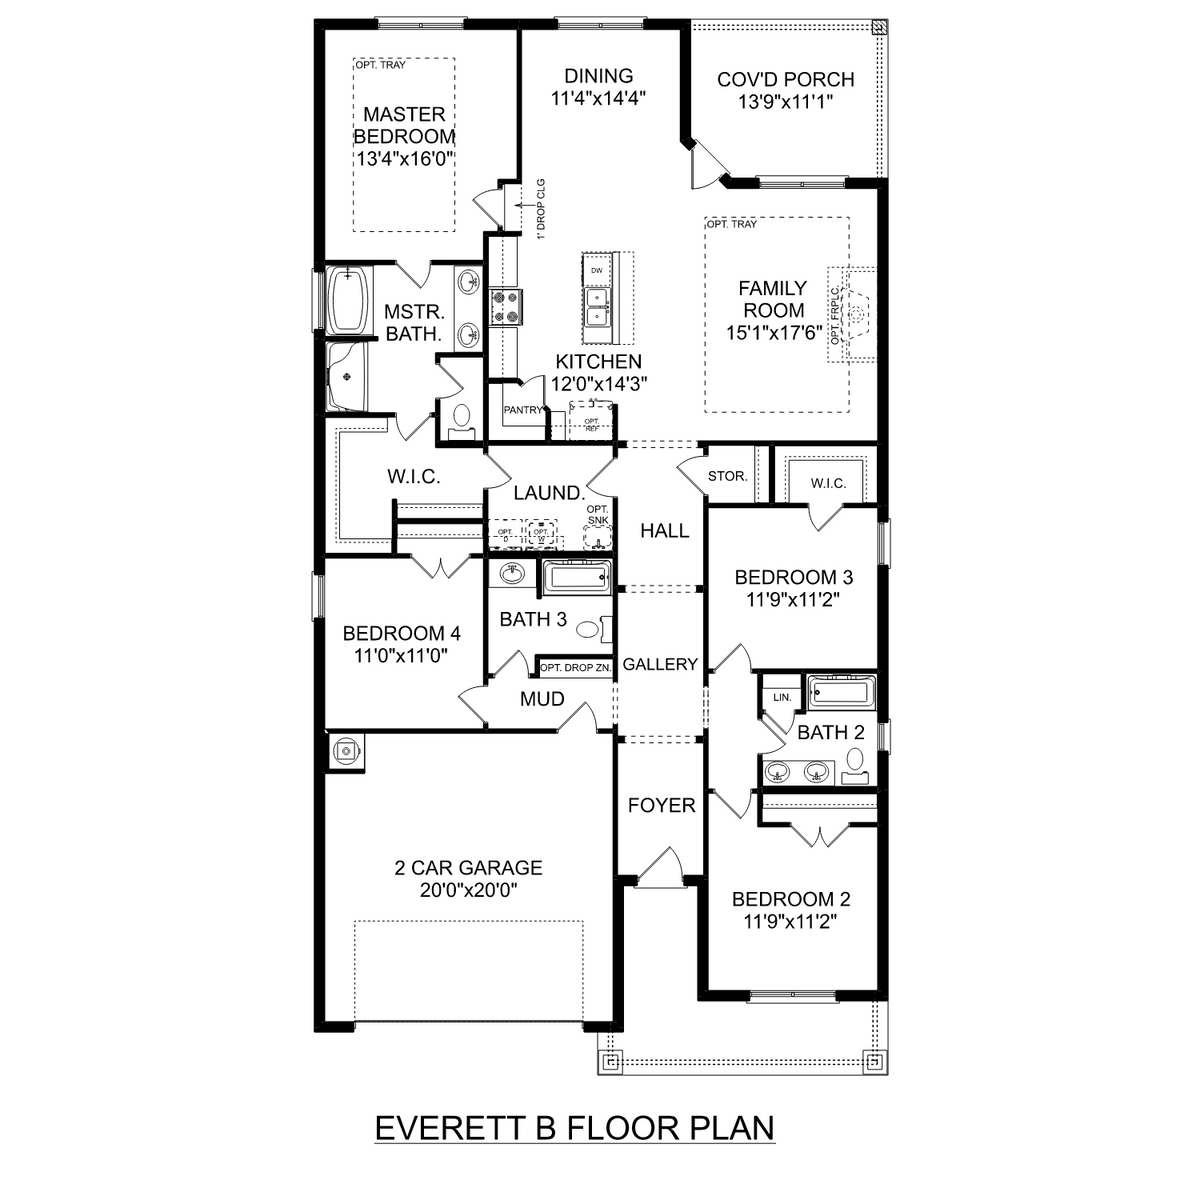 1 - The Everett B floor plan layout for 139 River Springs Court in Davidson Homes' Flint Meadows community.